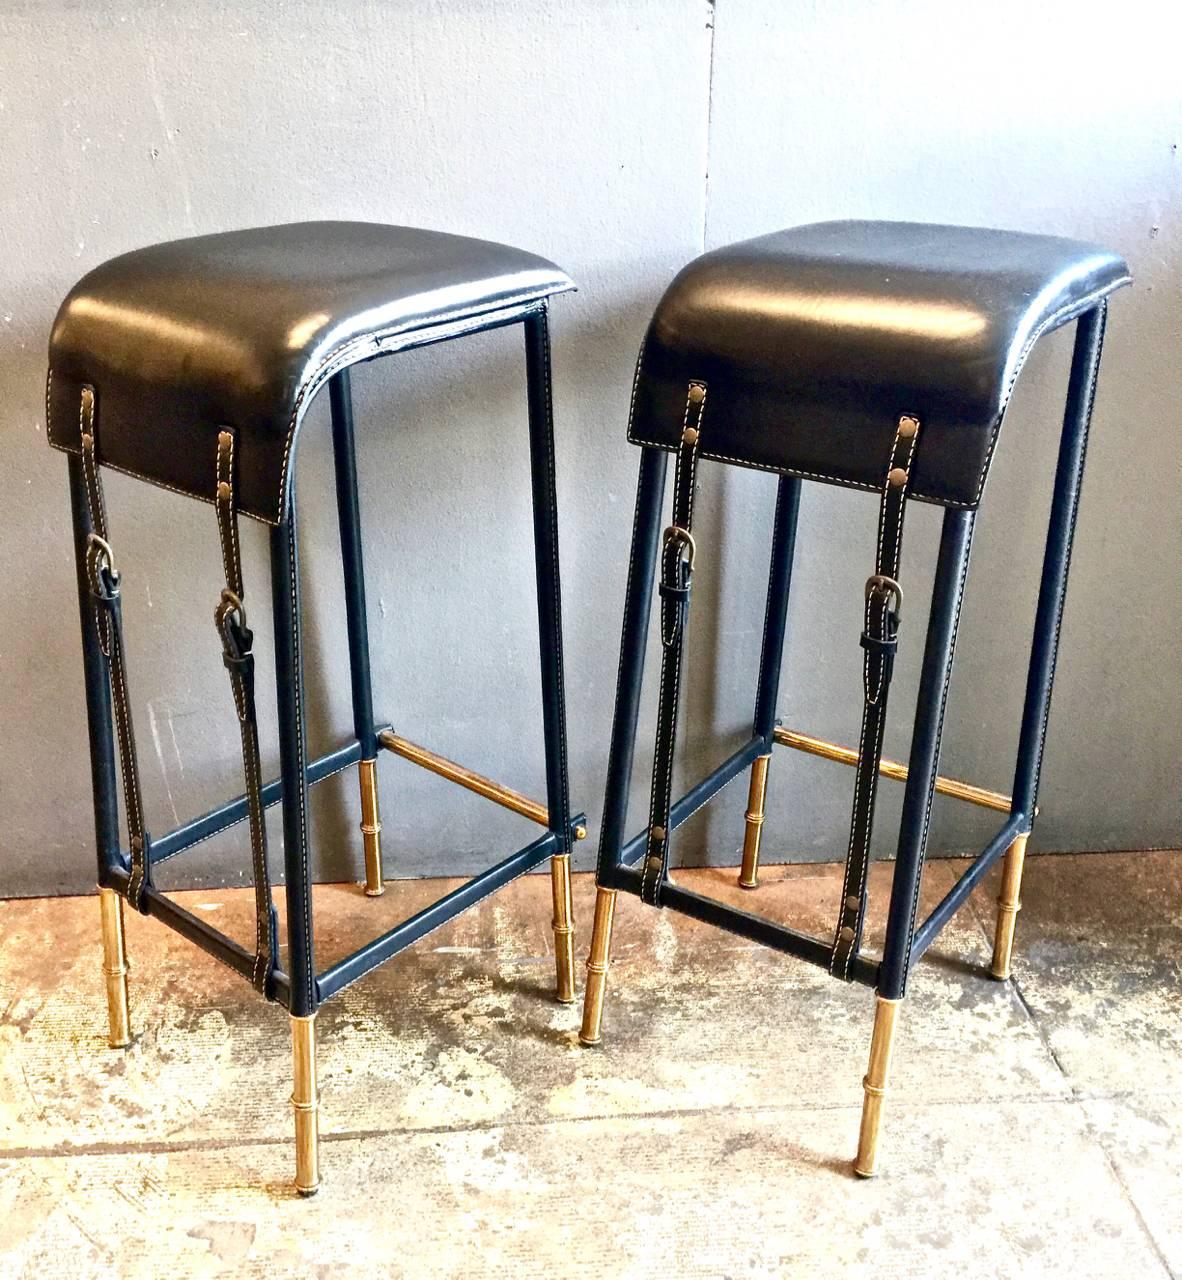 This is a superb pair of sexy Jacques Adnet bar stools that date to the 1950s. The Fine leather seats are strapped to the foot rails with horse tack buckles that have just the right amount of patina. The hand stitching is in great condition as are